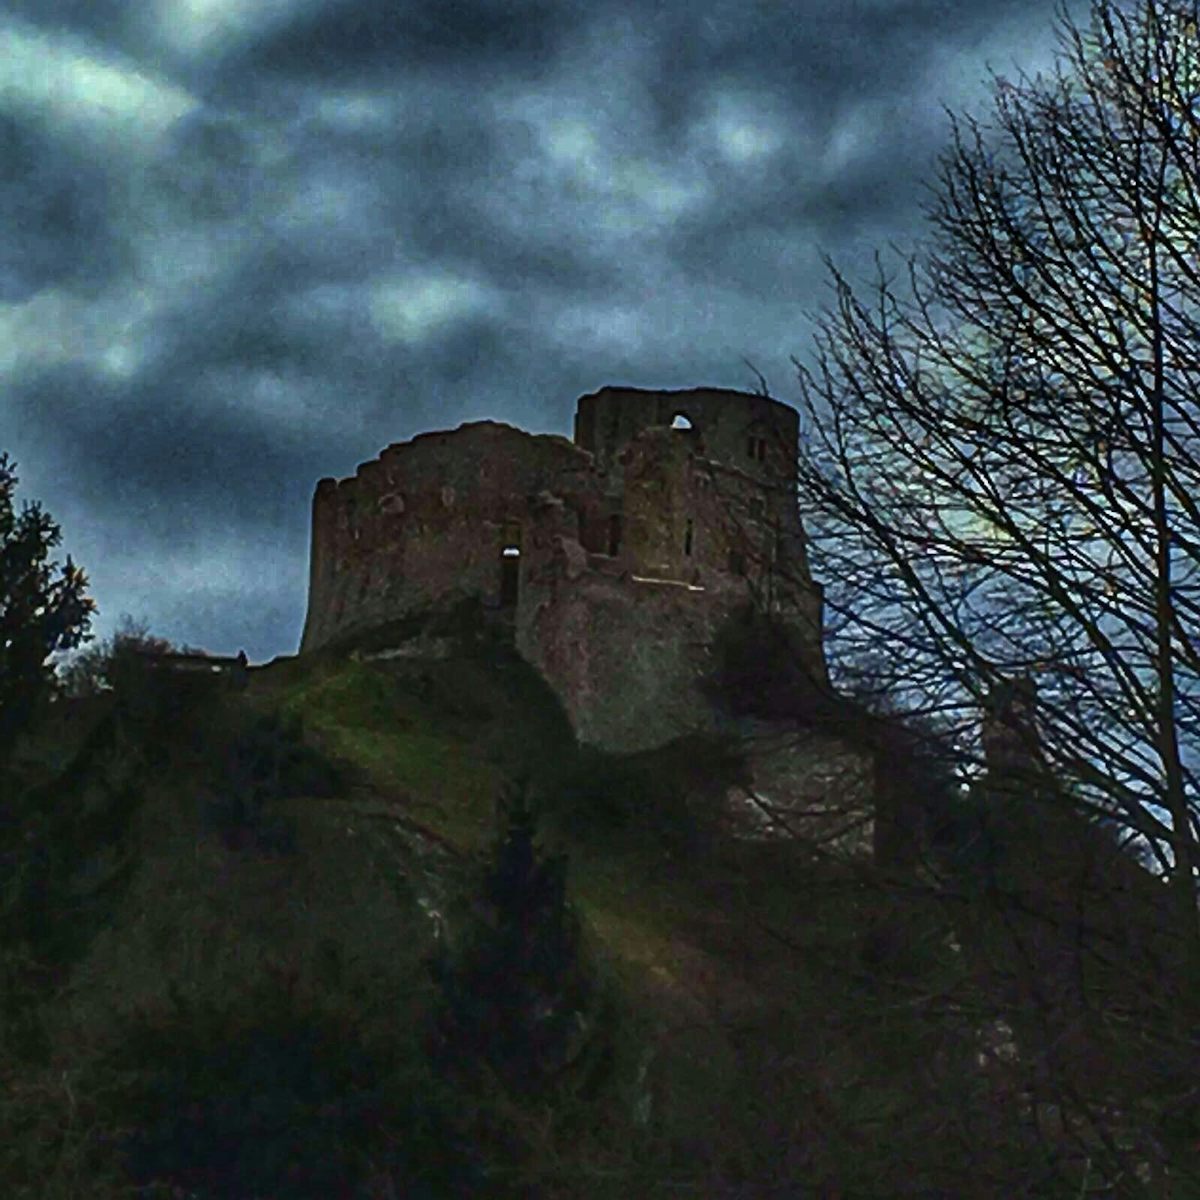 This is the castle that King Henry the Lionhearted built in a year. Extraor